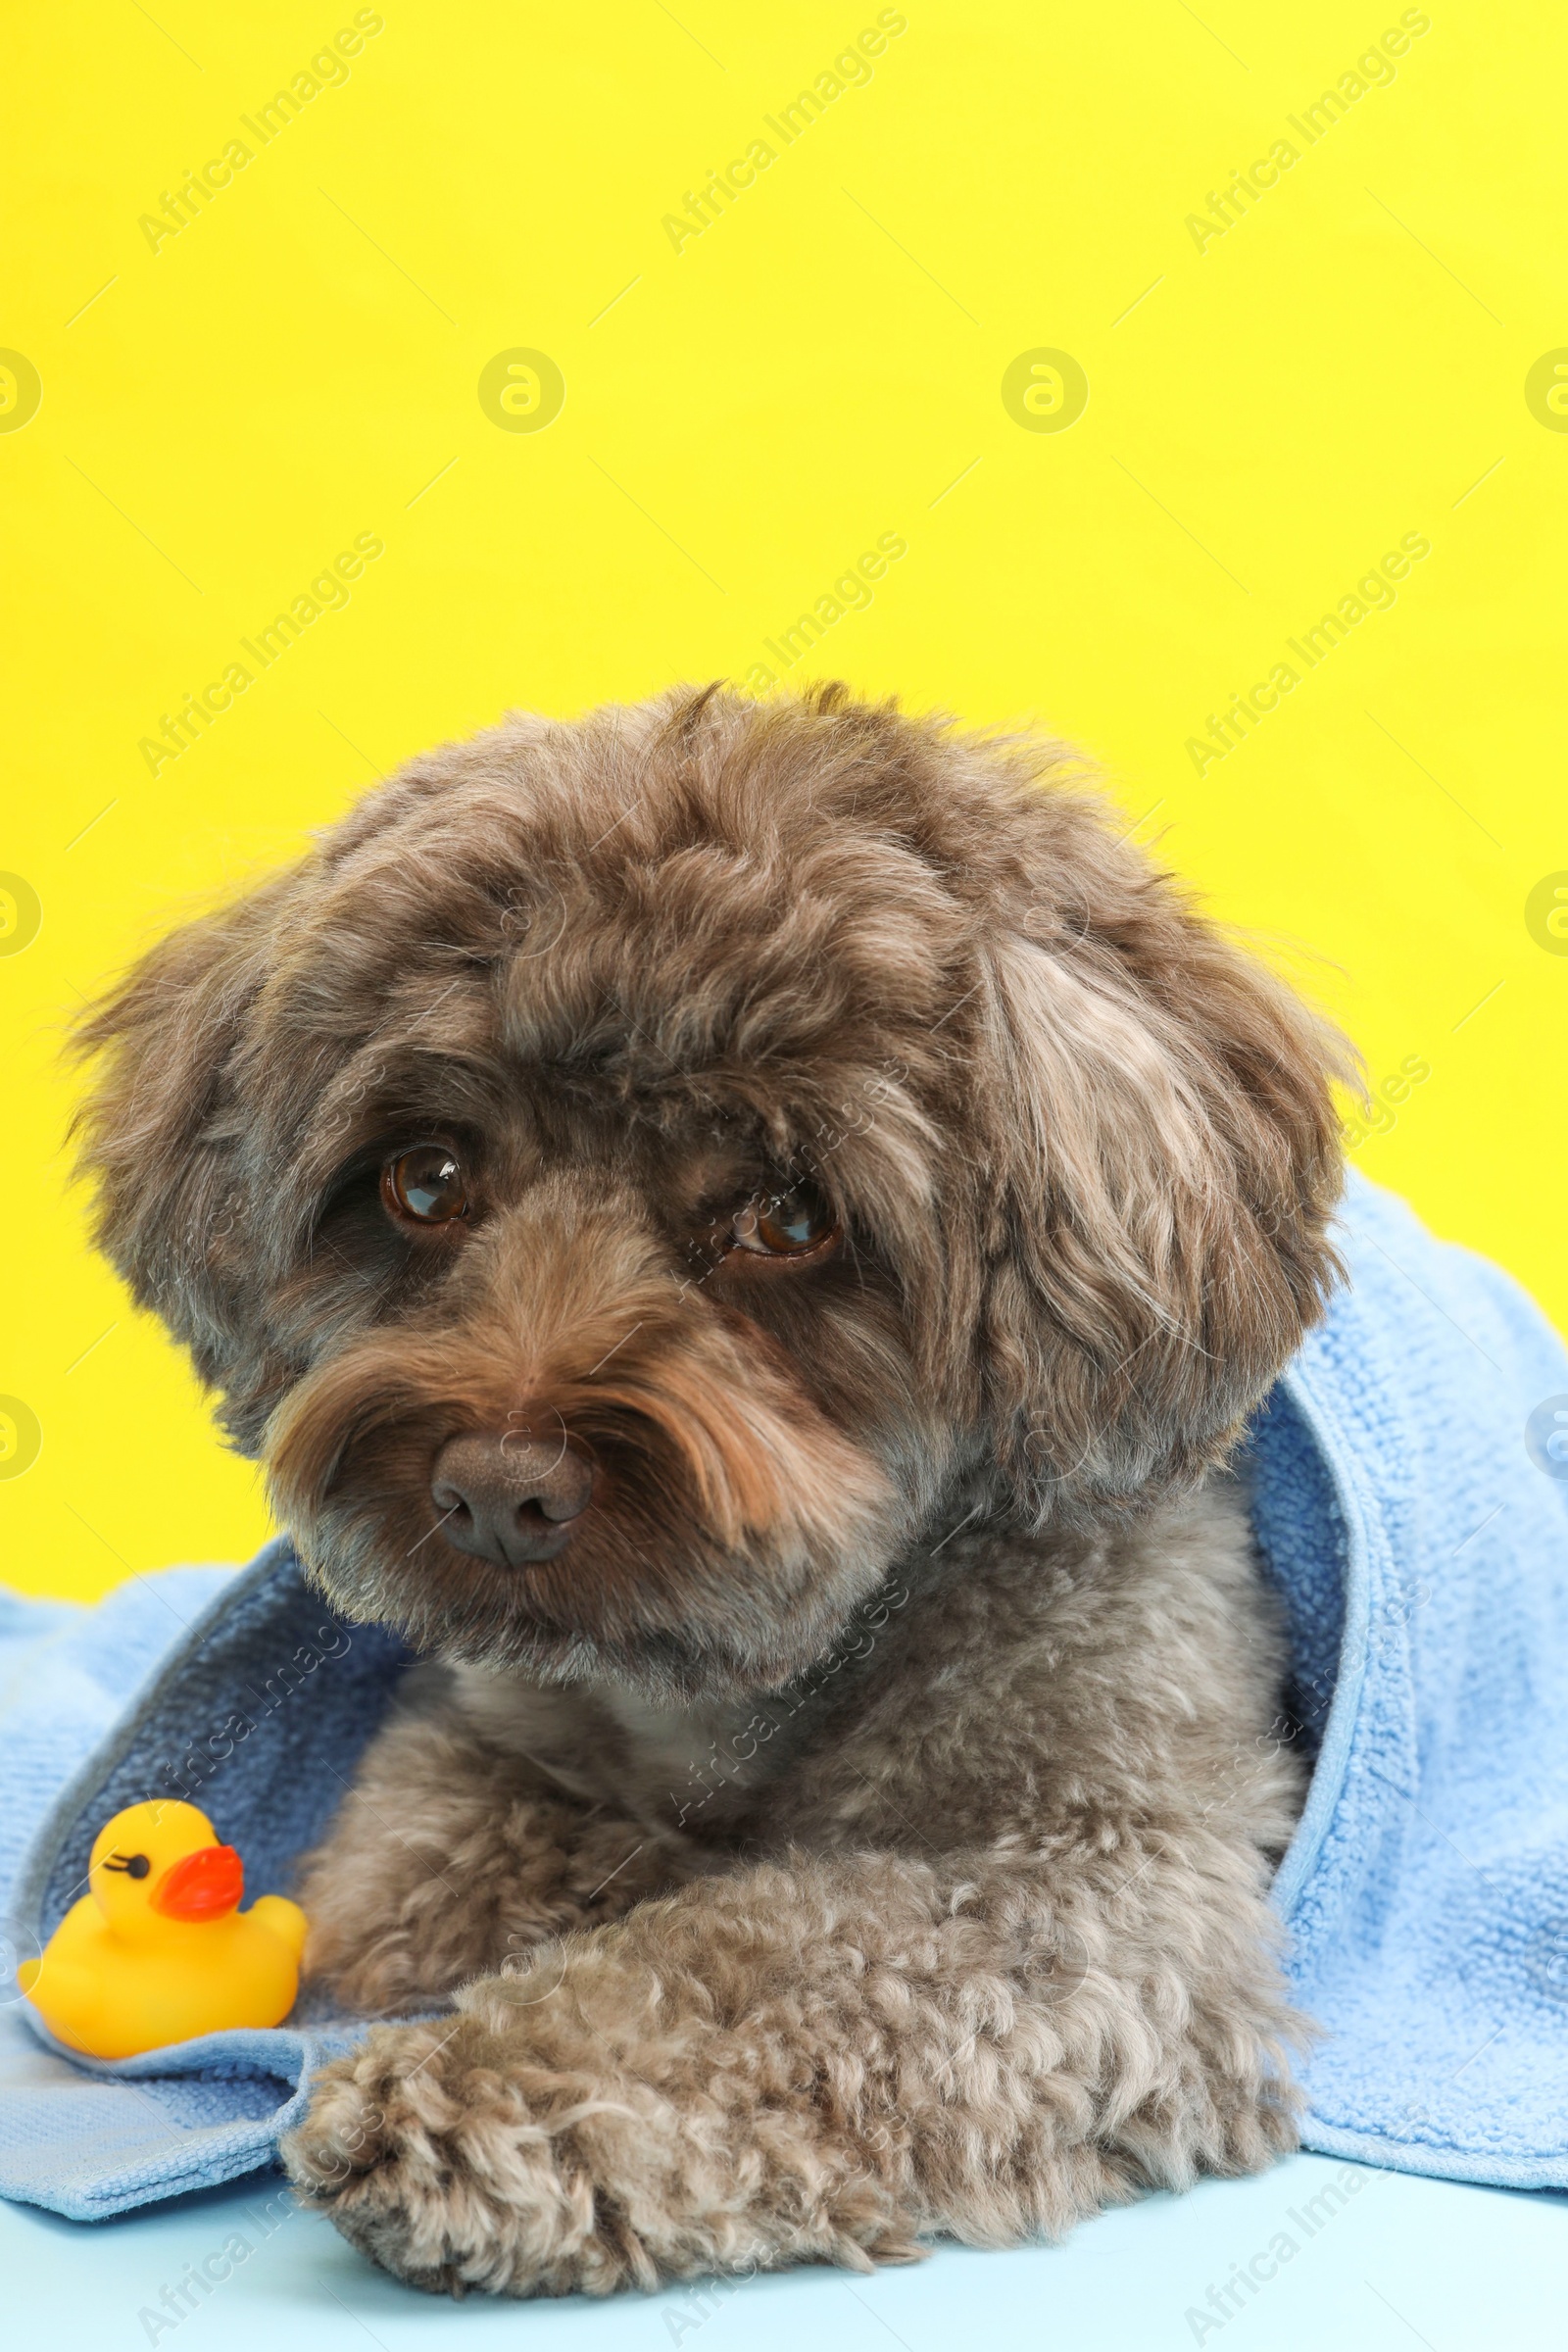 Photo of Cute Maltipoo dog wrapped in towel and bath duck on yellow background. Lovely pet